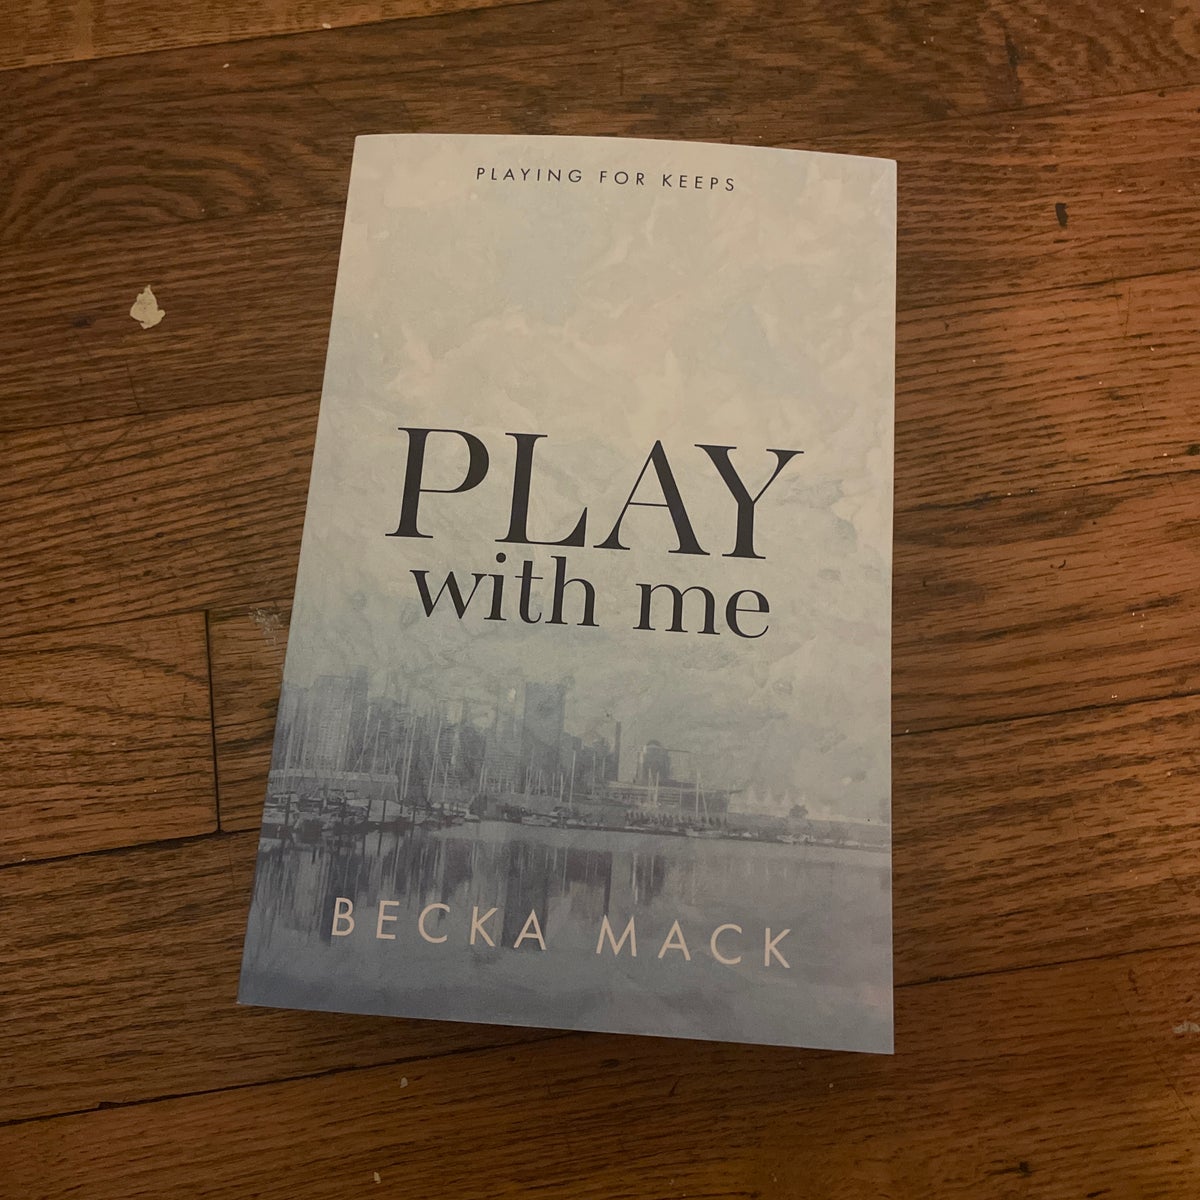 Love You Wild, Consider Me, Play With Me By Becka Mack